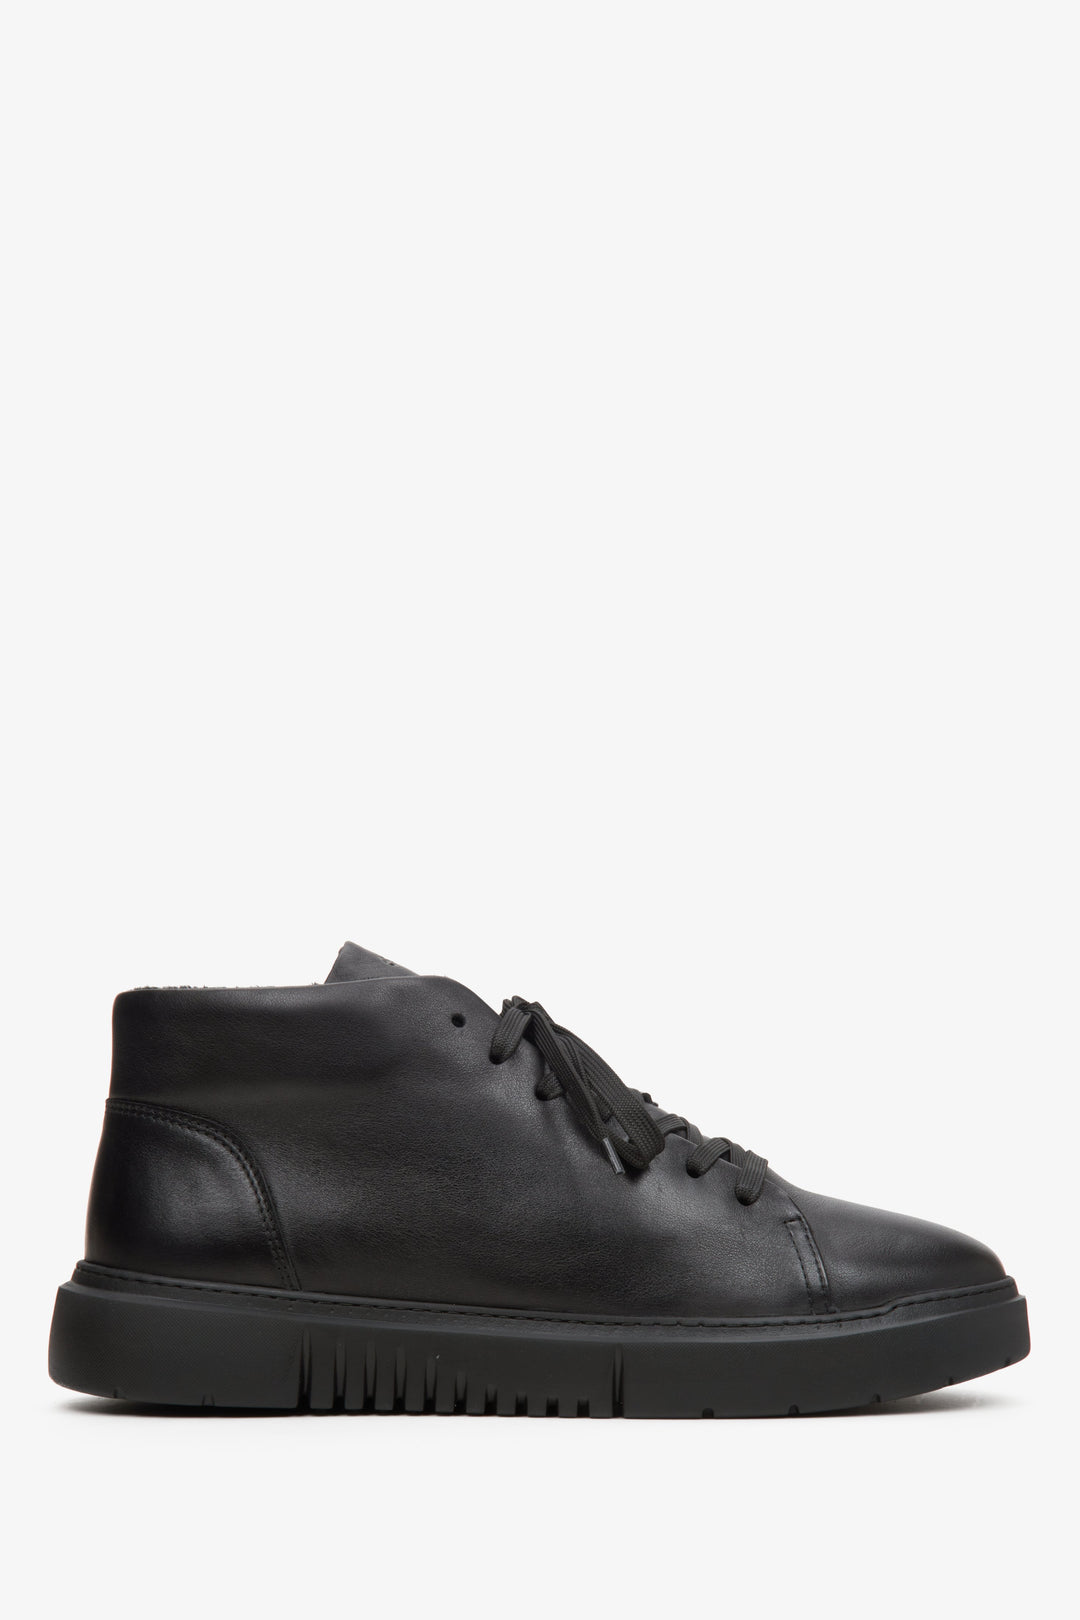 Men's Black Sneakers made of Genuine Leather with Insulation Estro ER00113684.